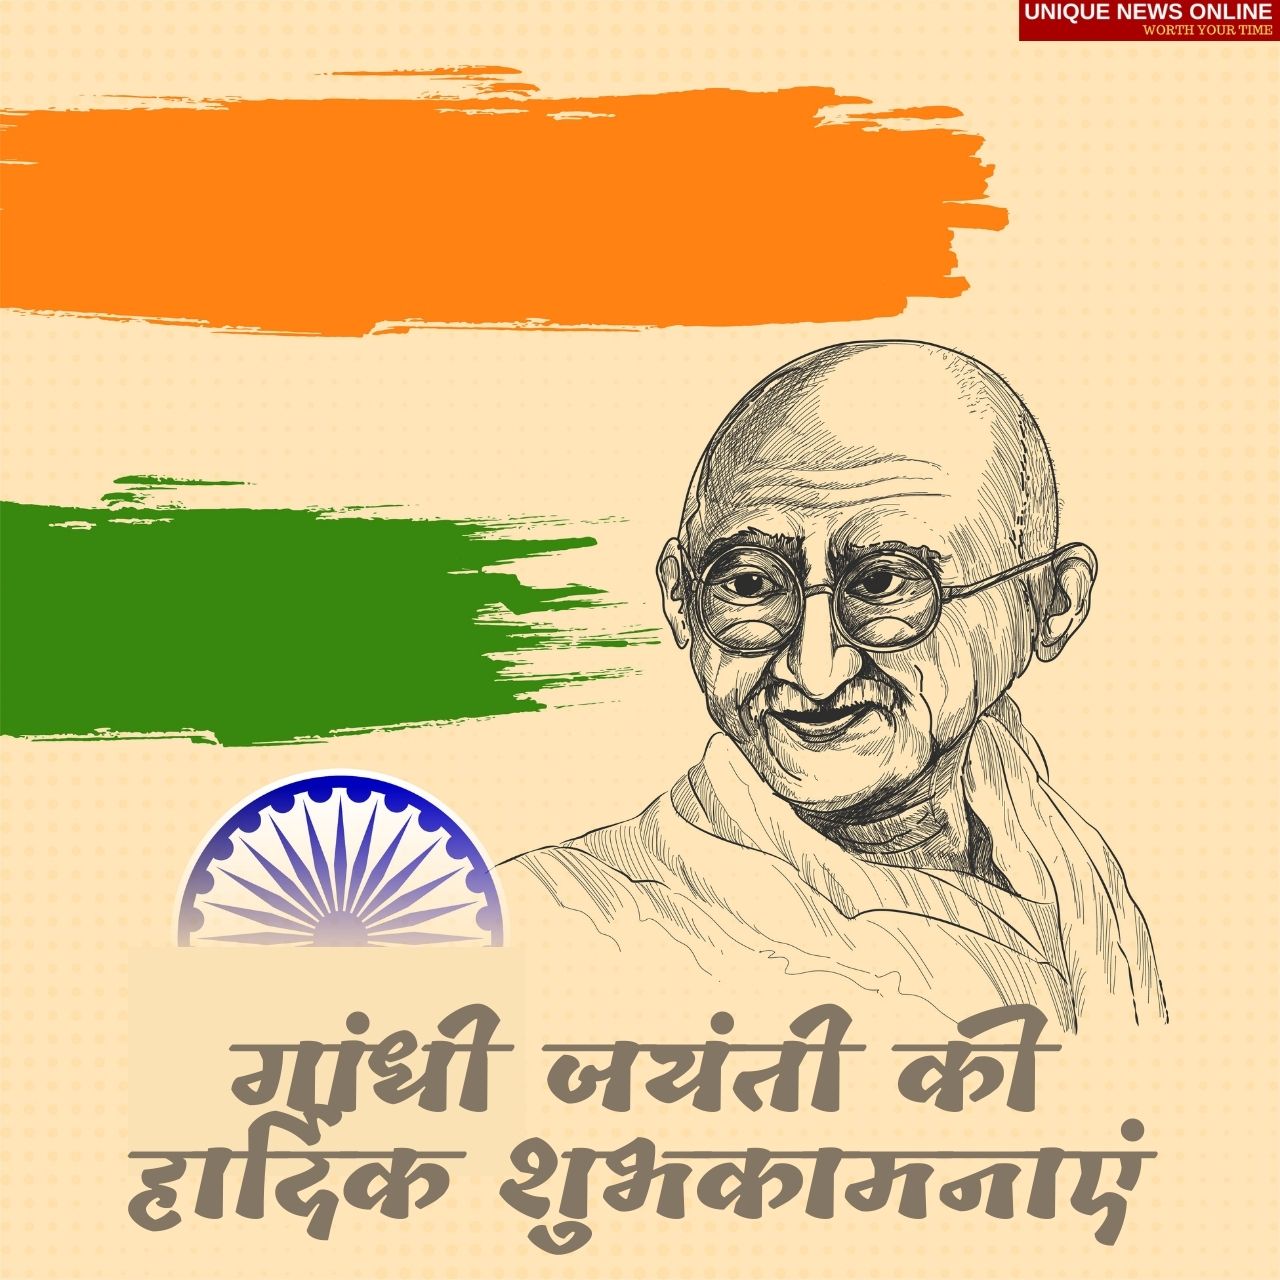 Gandhi Jayanti 2021 Hindi Wishes, Quotes, Messages, Wishes, Greetings, and HD Images to share